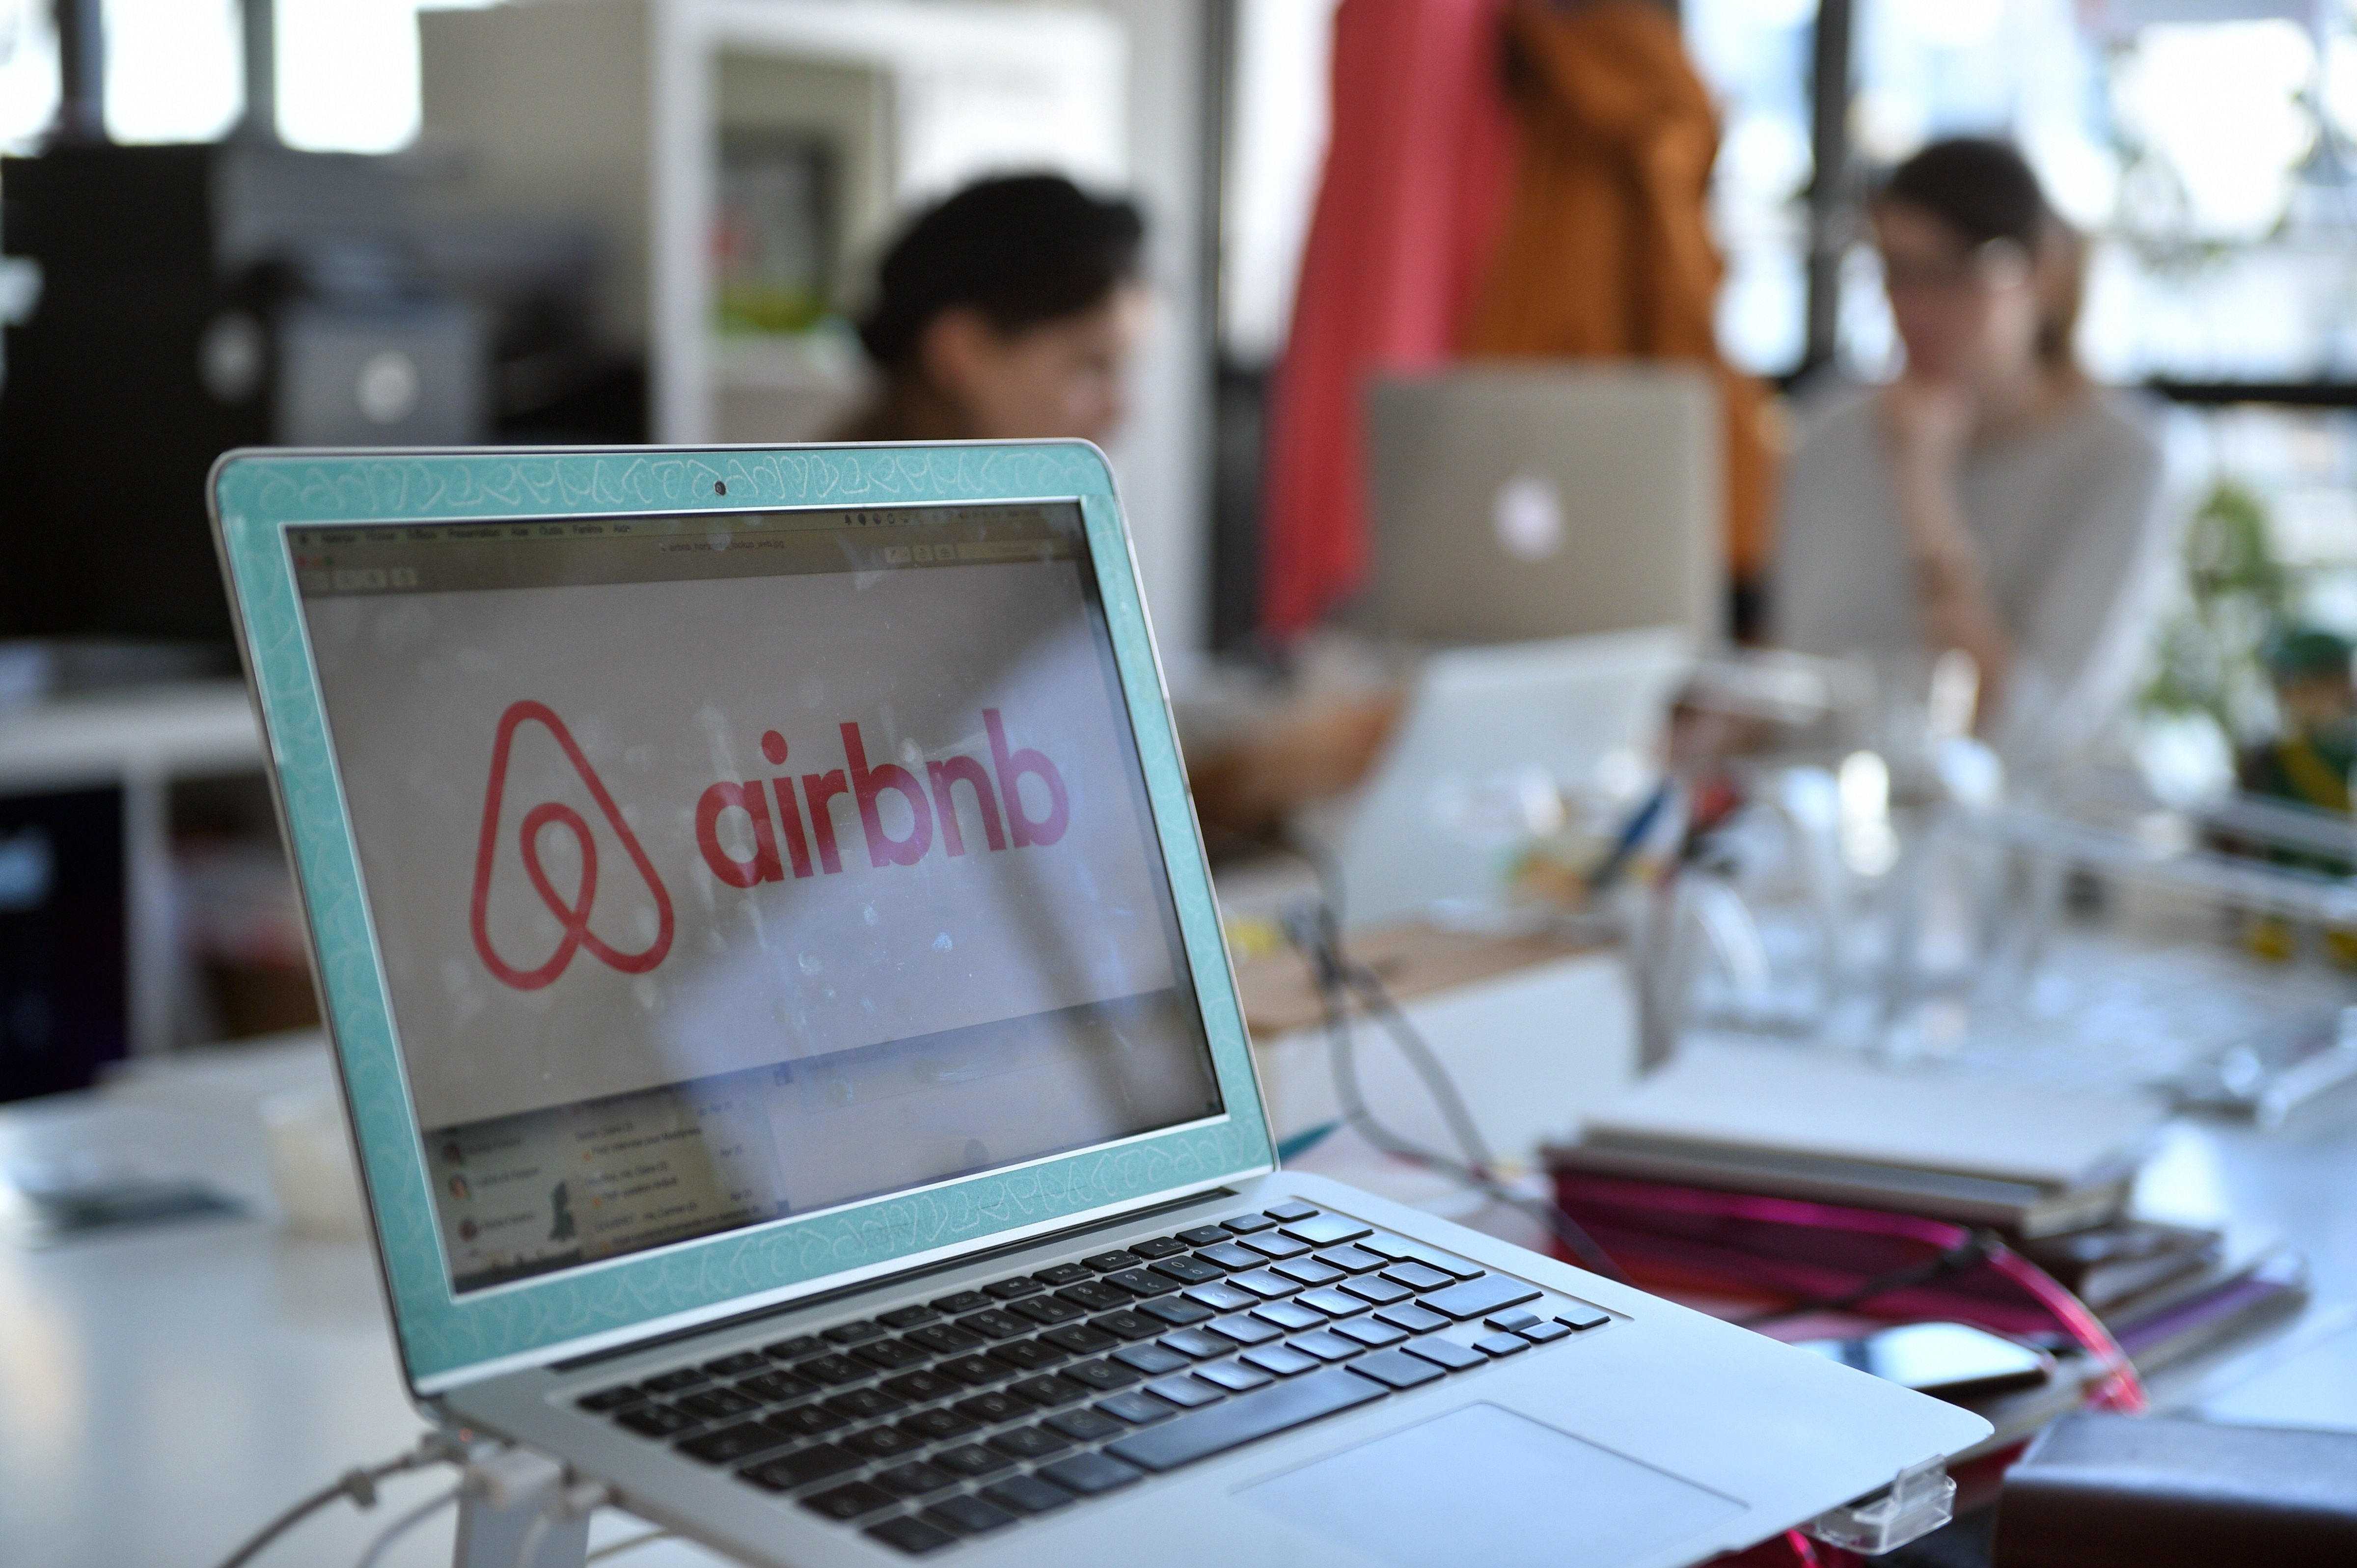 A picture shows the logo of online lodging service Airbnb displayed on a computer screen in the Airbnb offices in Paris on April 21, 2015. (Martin Bureau—AFP/Getty Images)